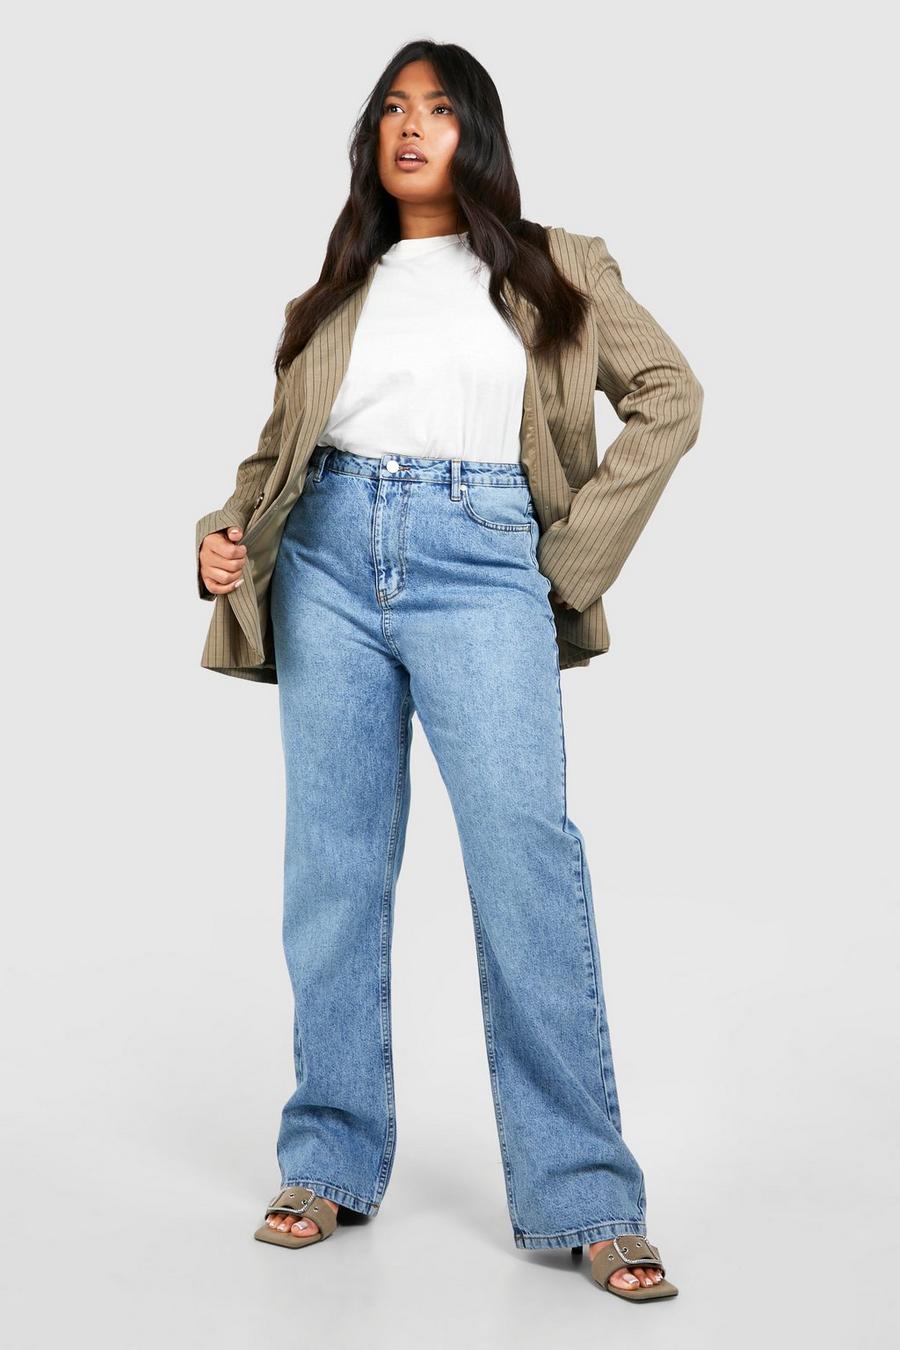 Young Beautiful Plus Size Model In Blue Jeans Xxl Woman Stock